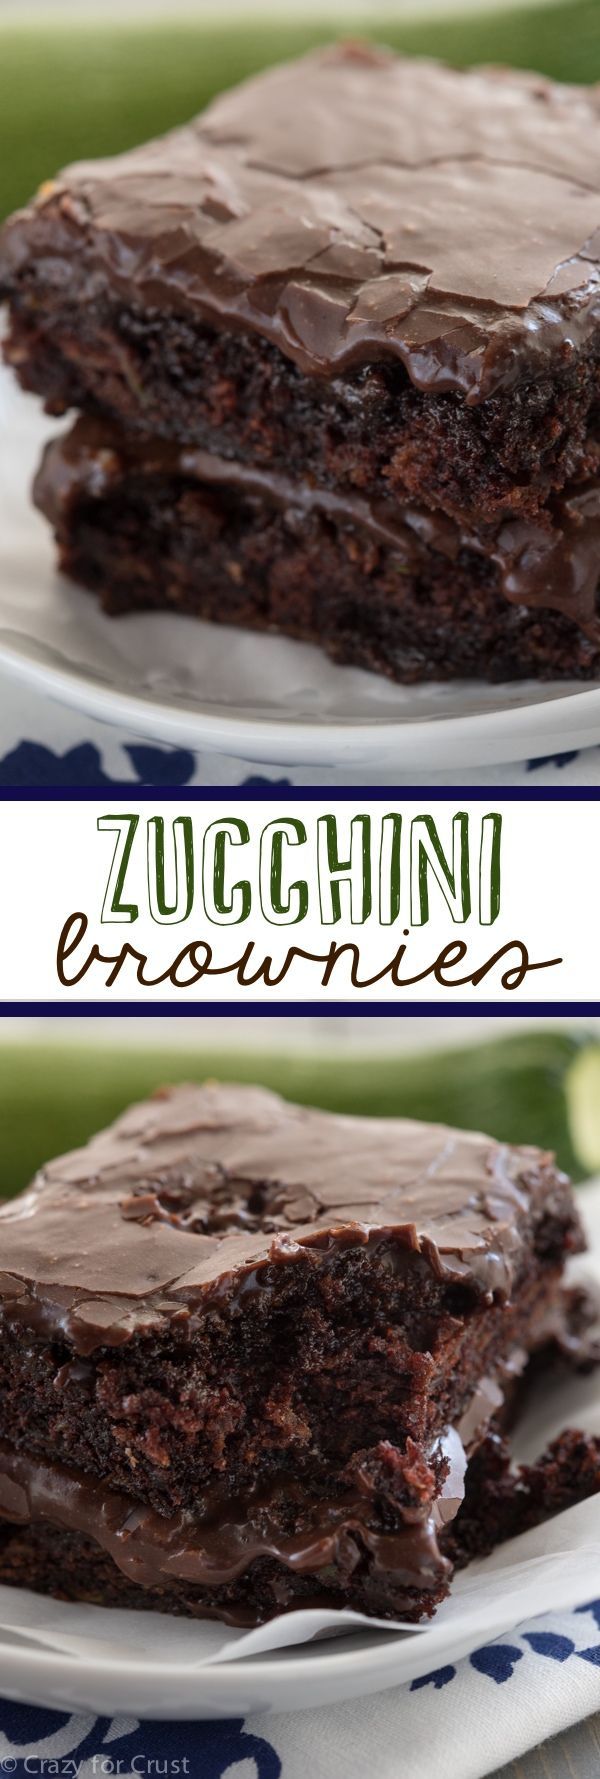 Zucchini Brownies – the easiest recipe for the most gooey, chocolaty, fudgy brownies full of zucchini! And NO ONE will guess!